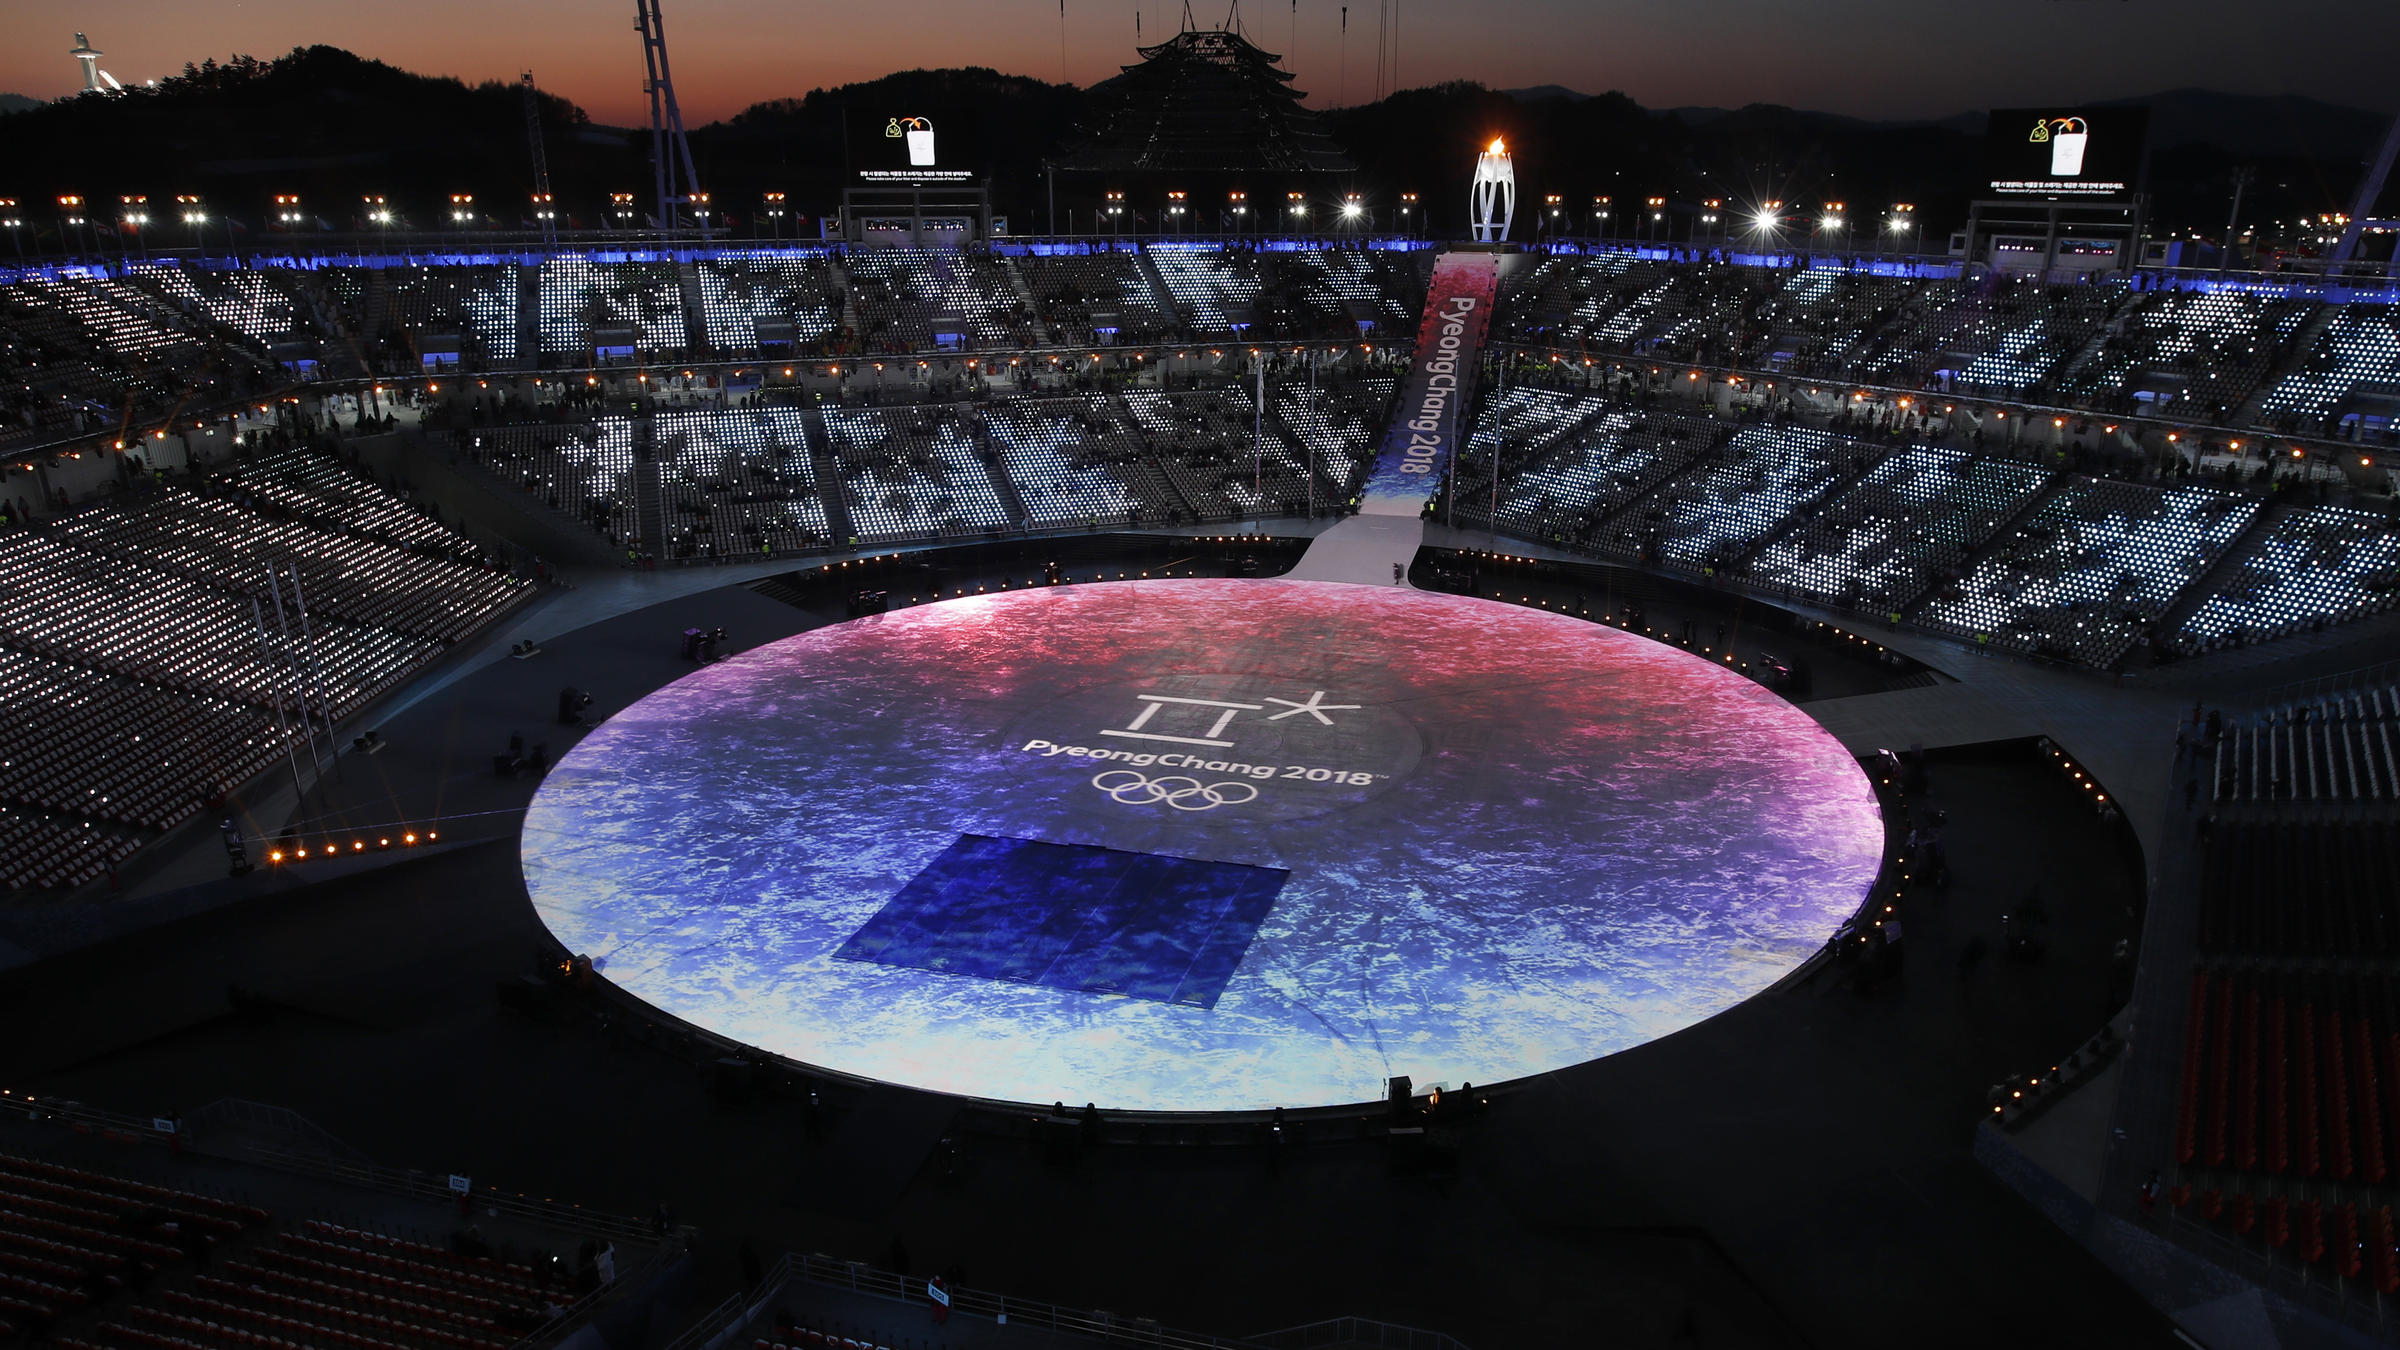 Pyeongchang Olympics Closing Ceremony Ends Biggest Winter Games Ever